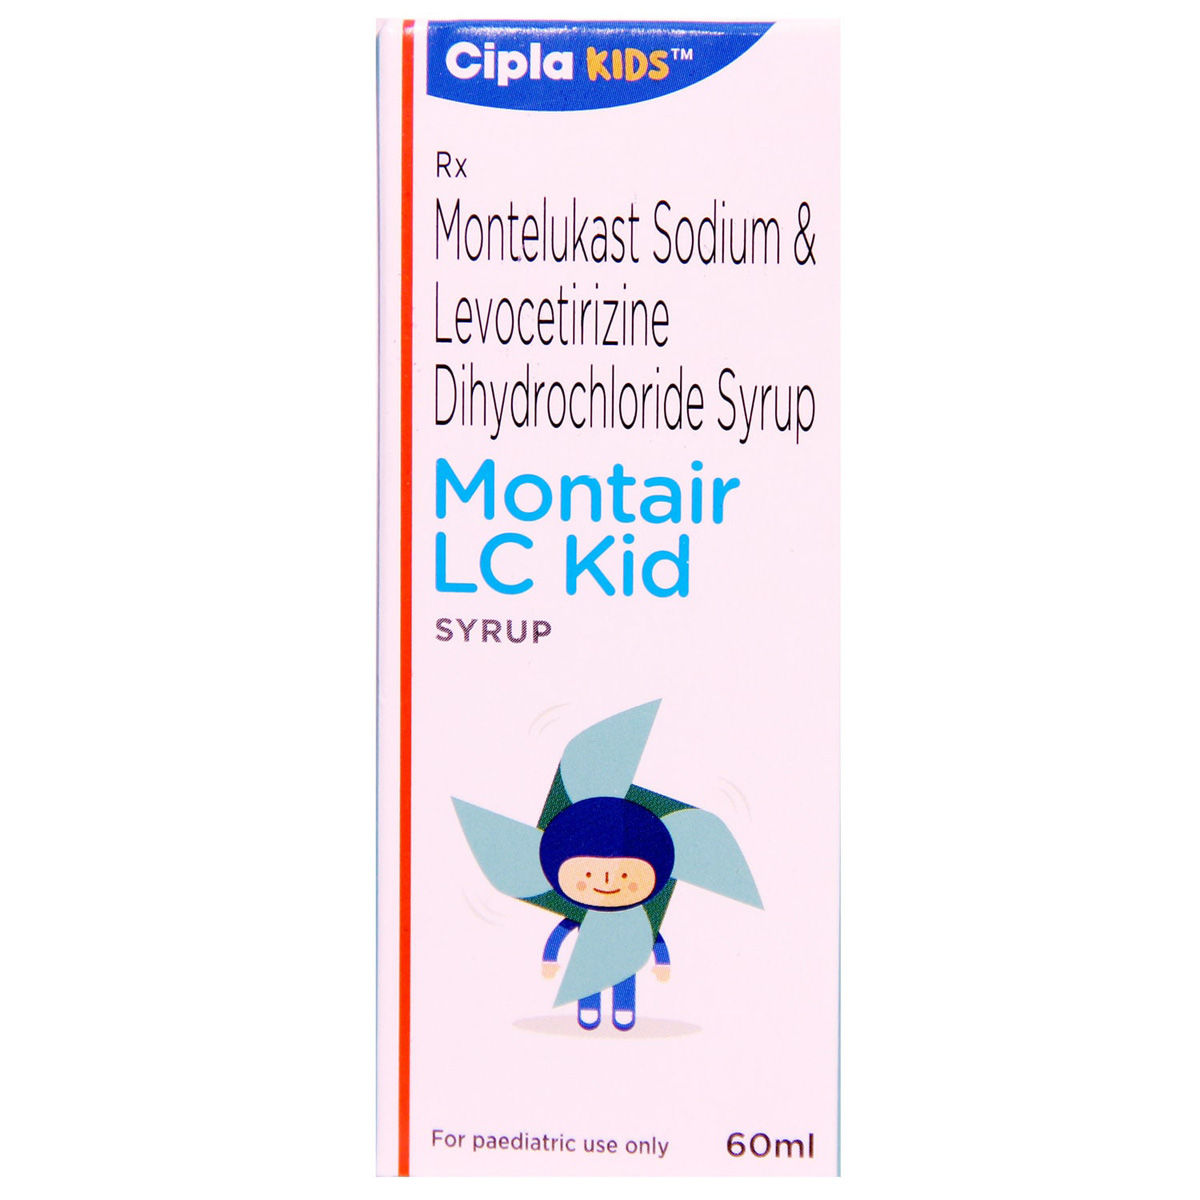 Montair LC Kid Syrup 60 ml, Pack of 1 SYRUP